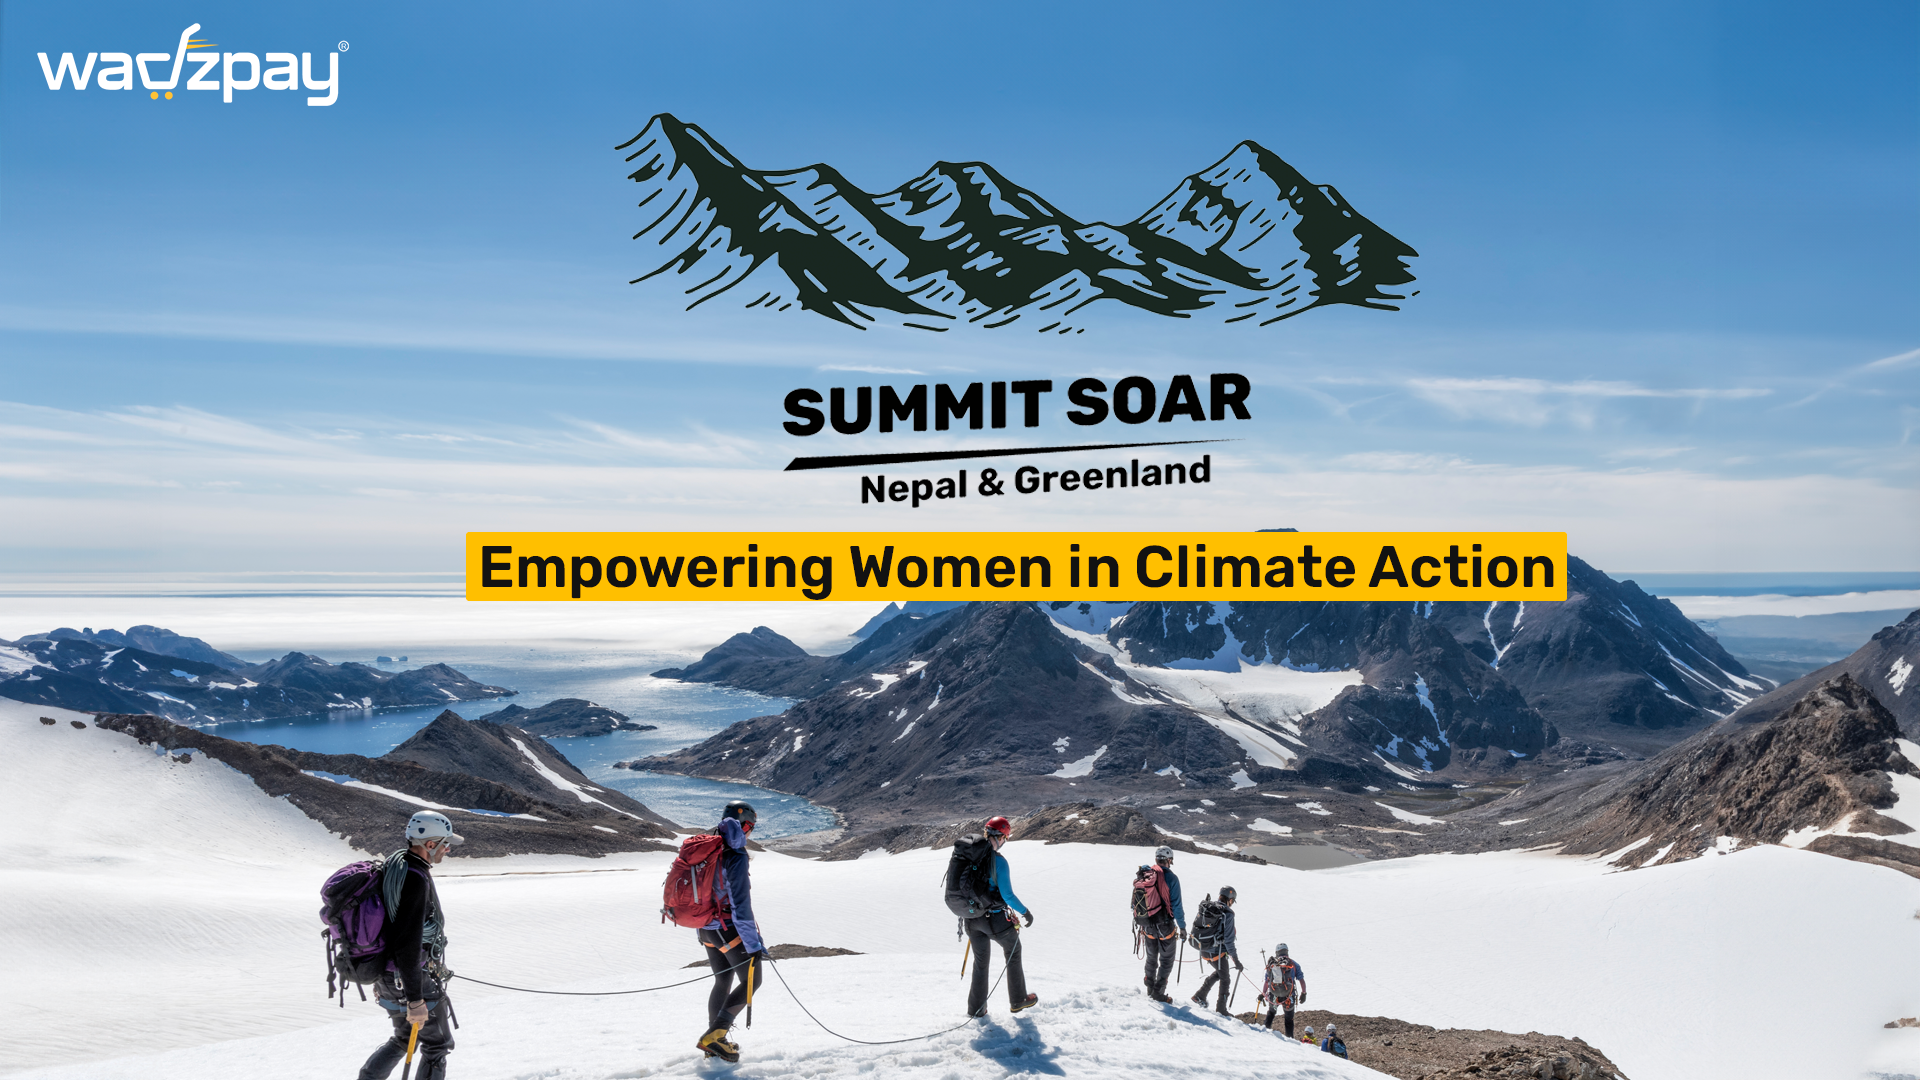 Summit Soar: Empowering Women in Climate Action